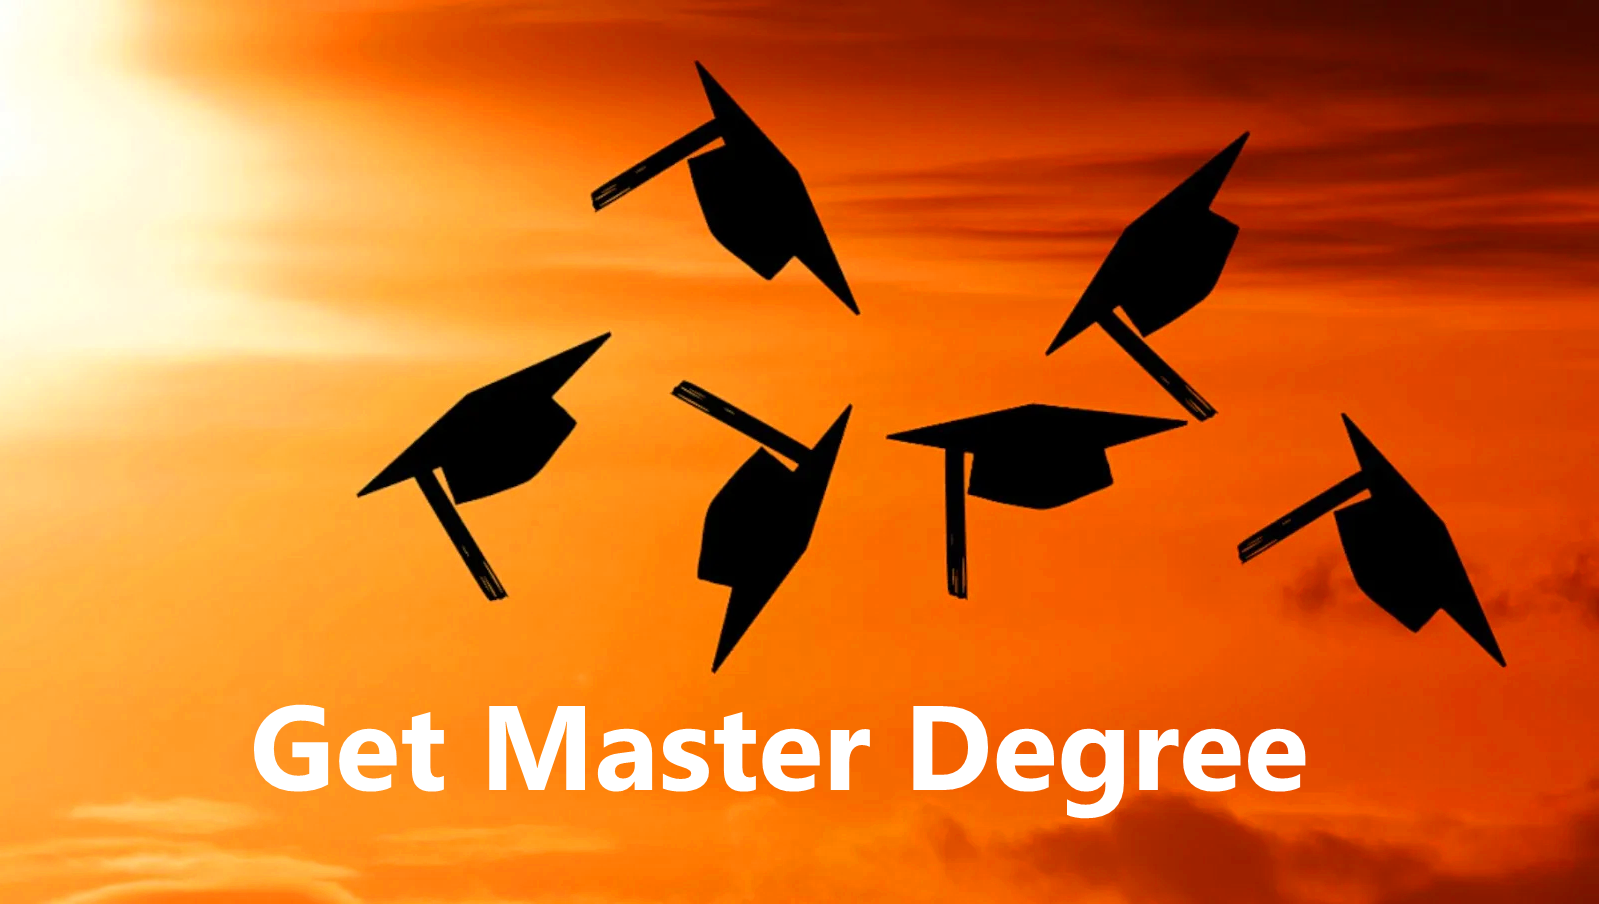 How To Get A Master s Degree Without Debt Enter To Study